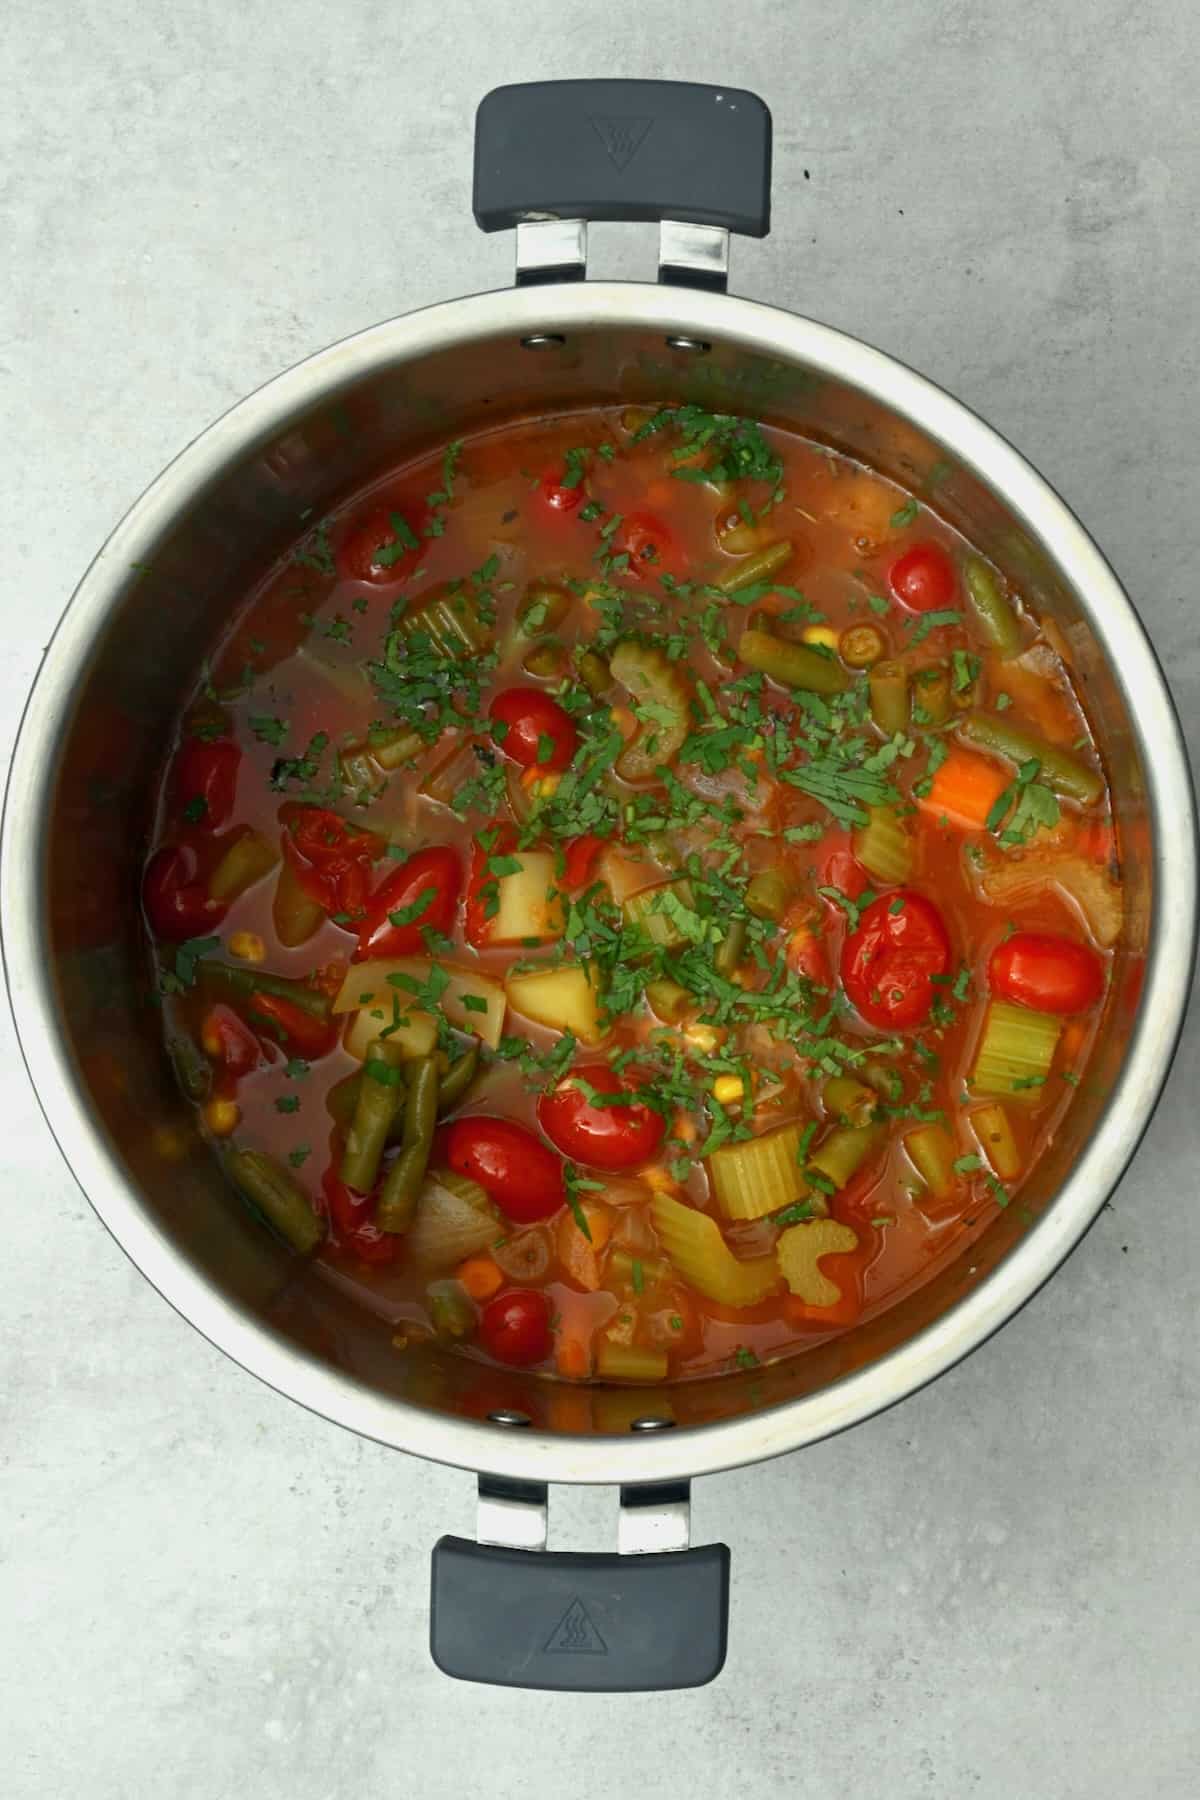 Instant pot filled with vegetable soup